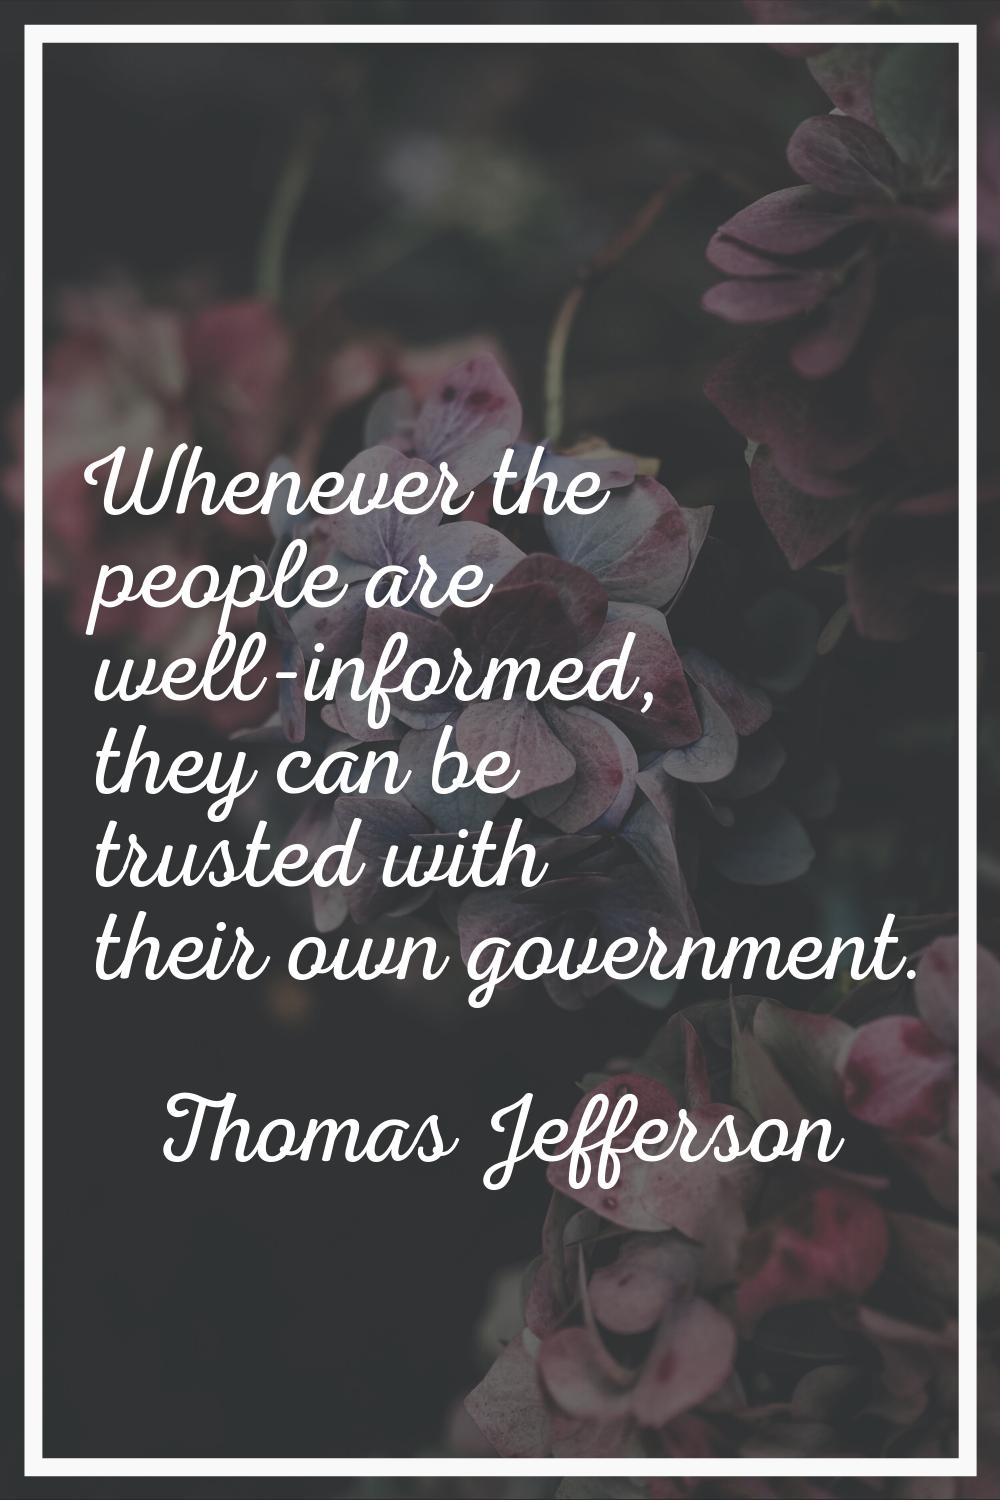 Whenever the people are well-informed, they can be trusted with their own government.